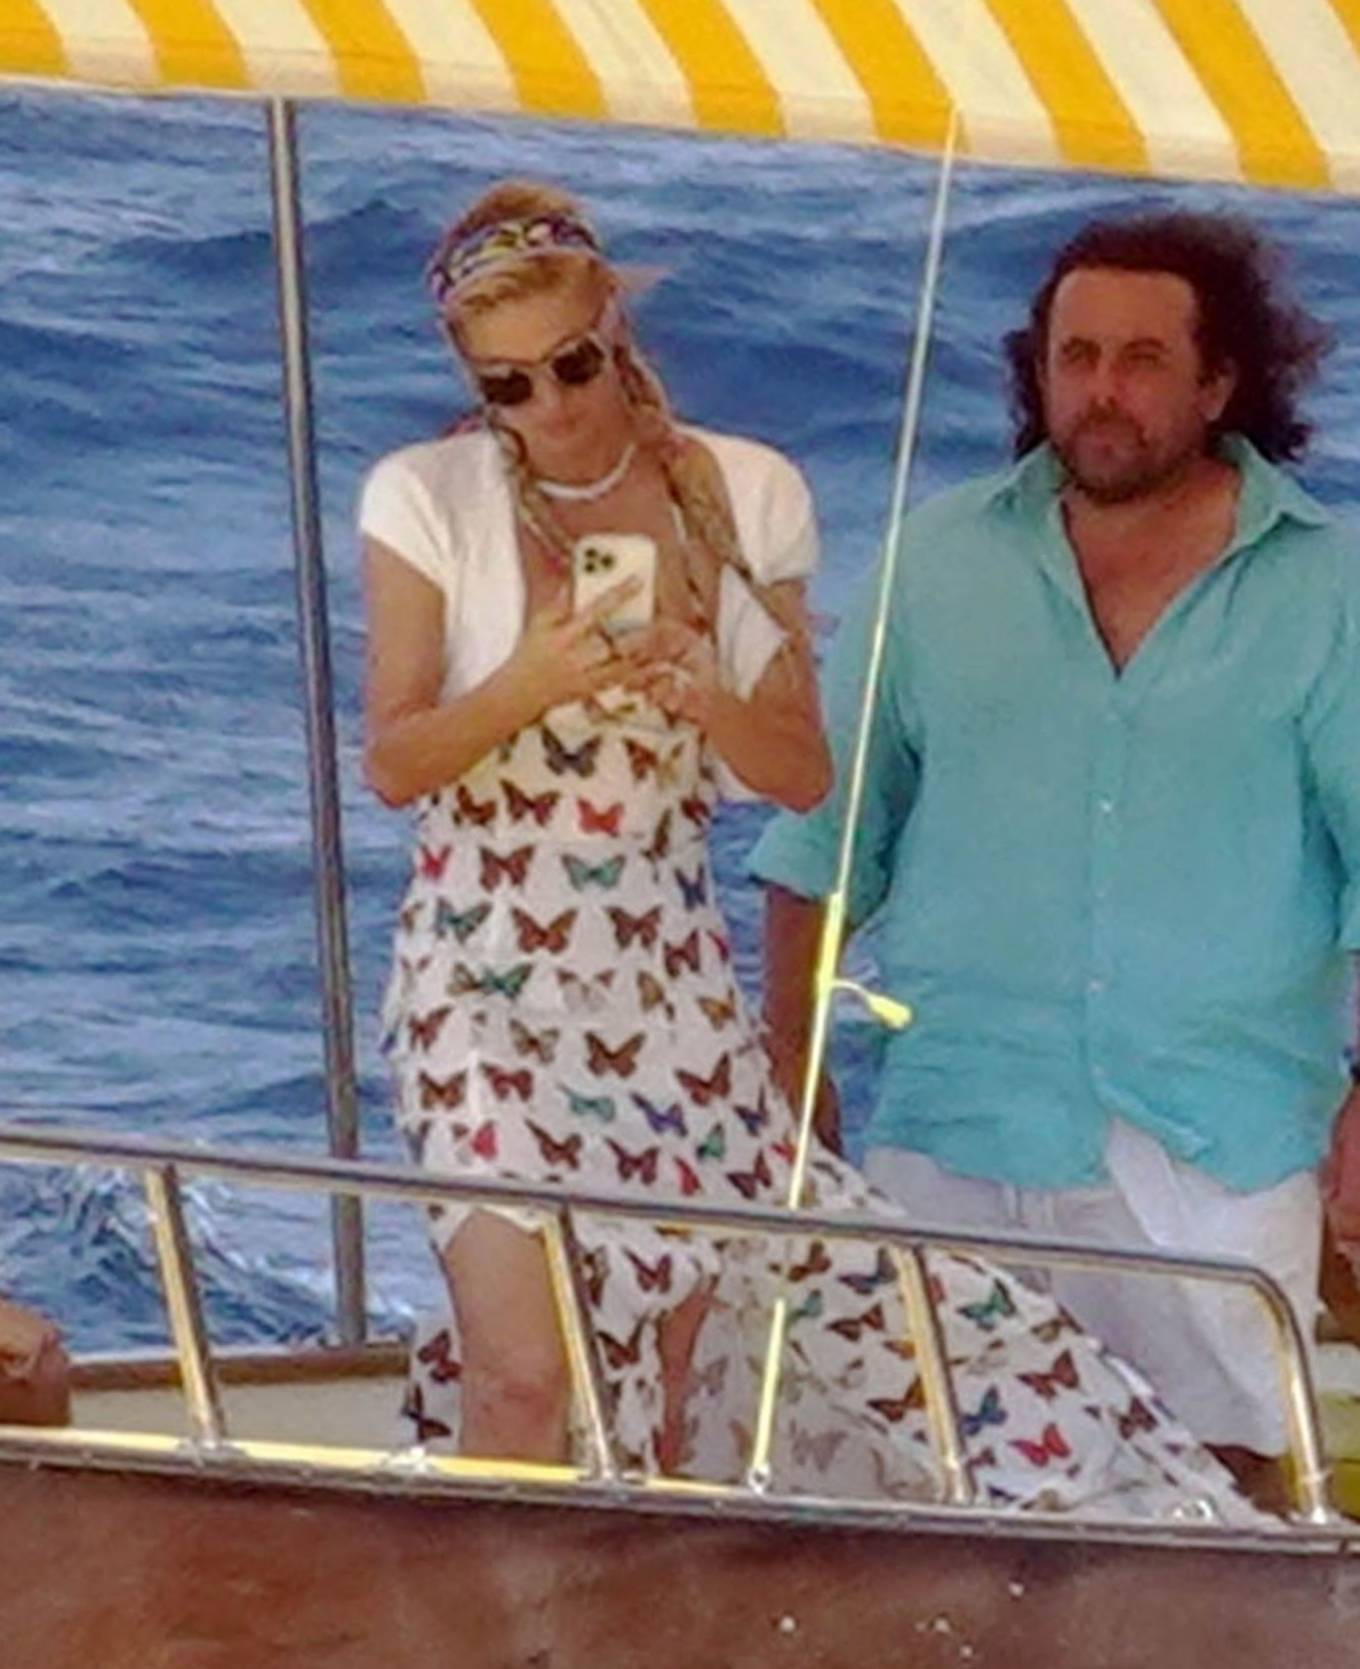 Paris Hilton - With her husband Carter Reum on a boat ride in Capri